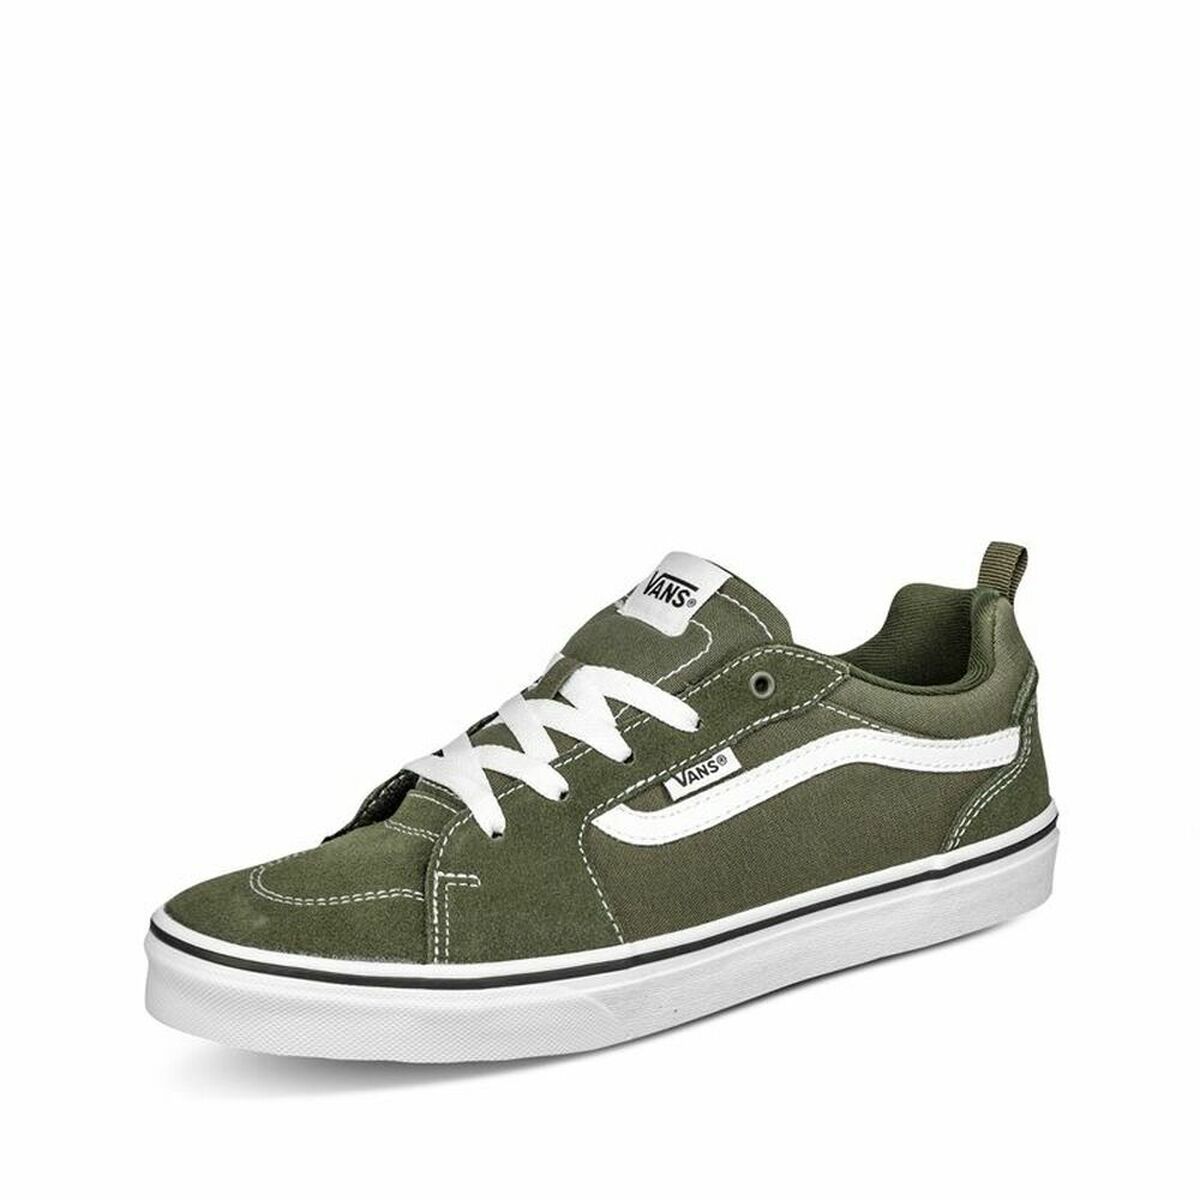 Chaussures casual Vans YT Filmore